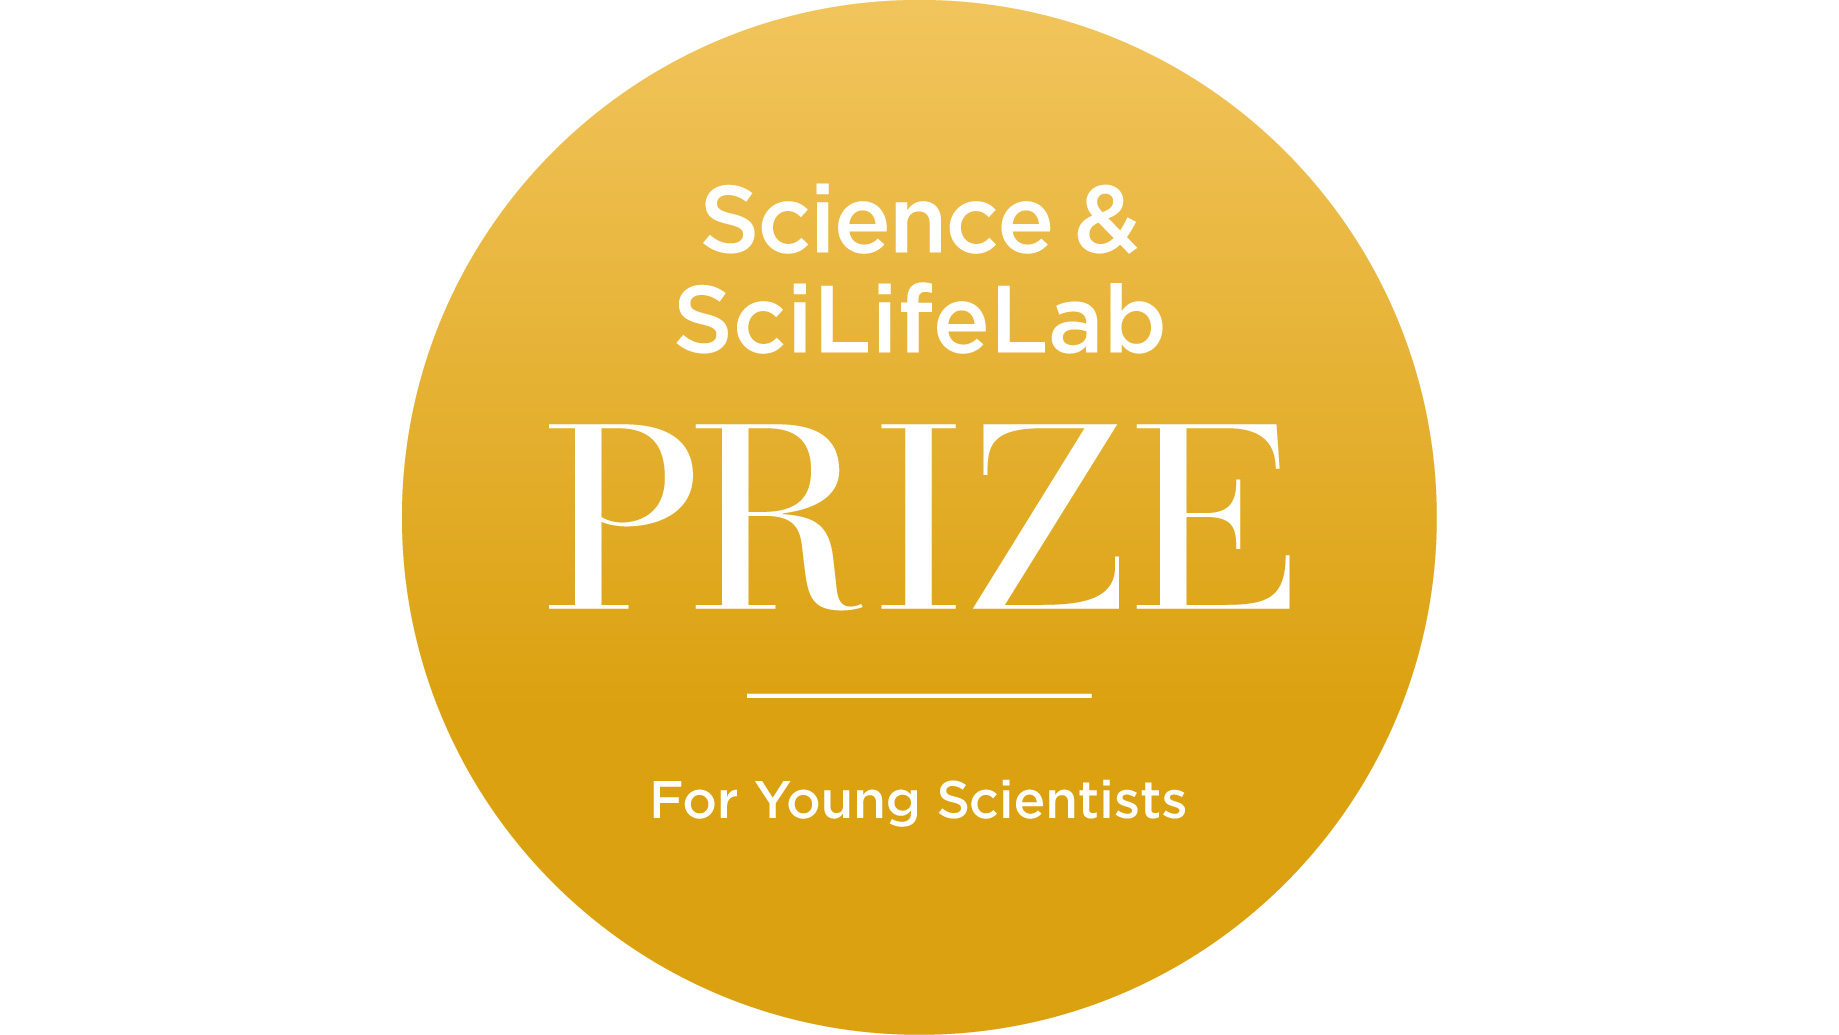 Science & SciLifeLab Prize for Young Scientists